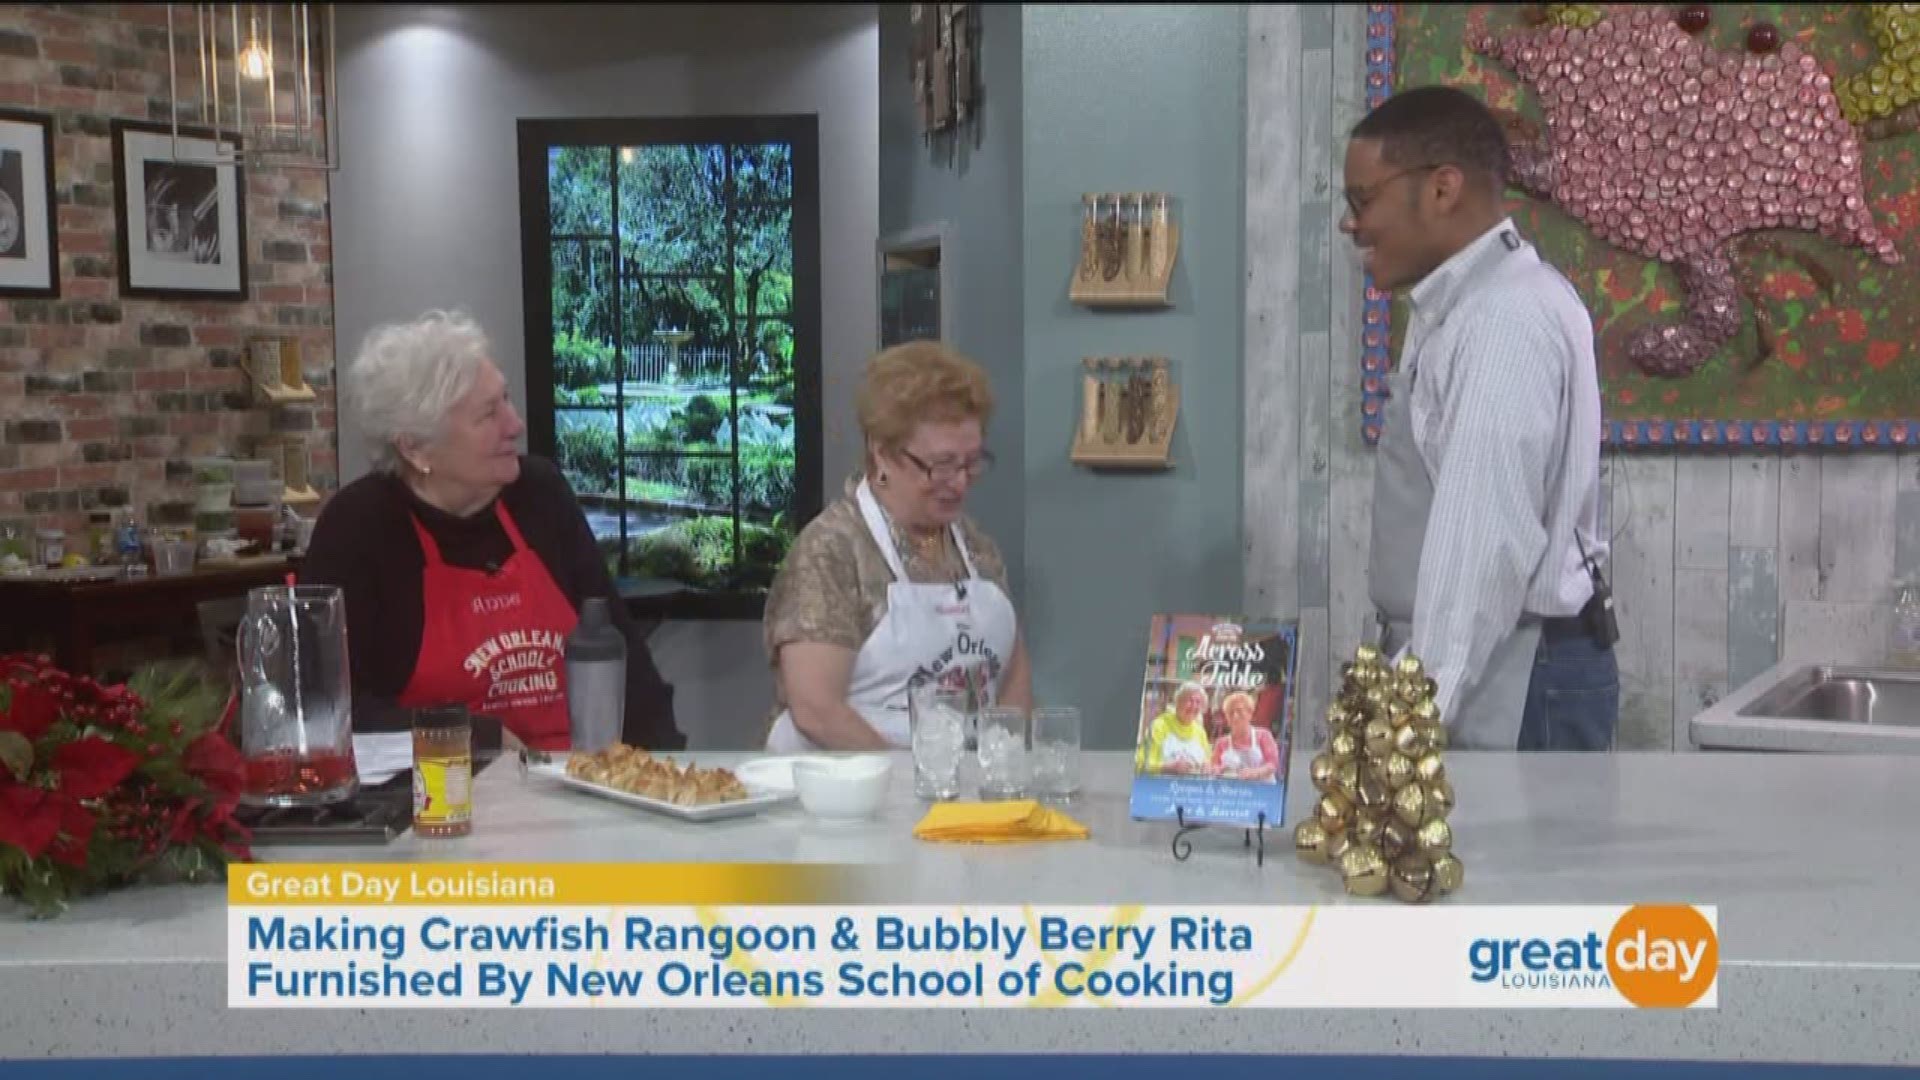 Chefs Anne Leonhard and Harriet Robin with the New Orleans School of Cooking stopped by to prepare an appetizer and alcoholic beverage that makes a perfect pair.